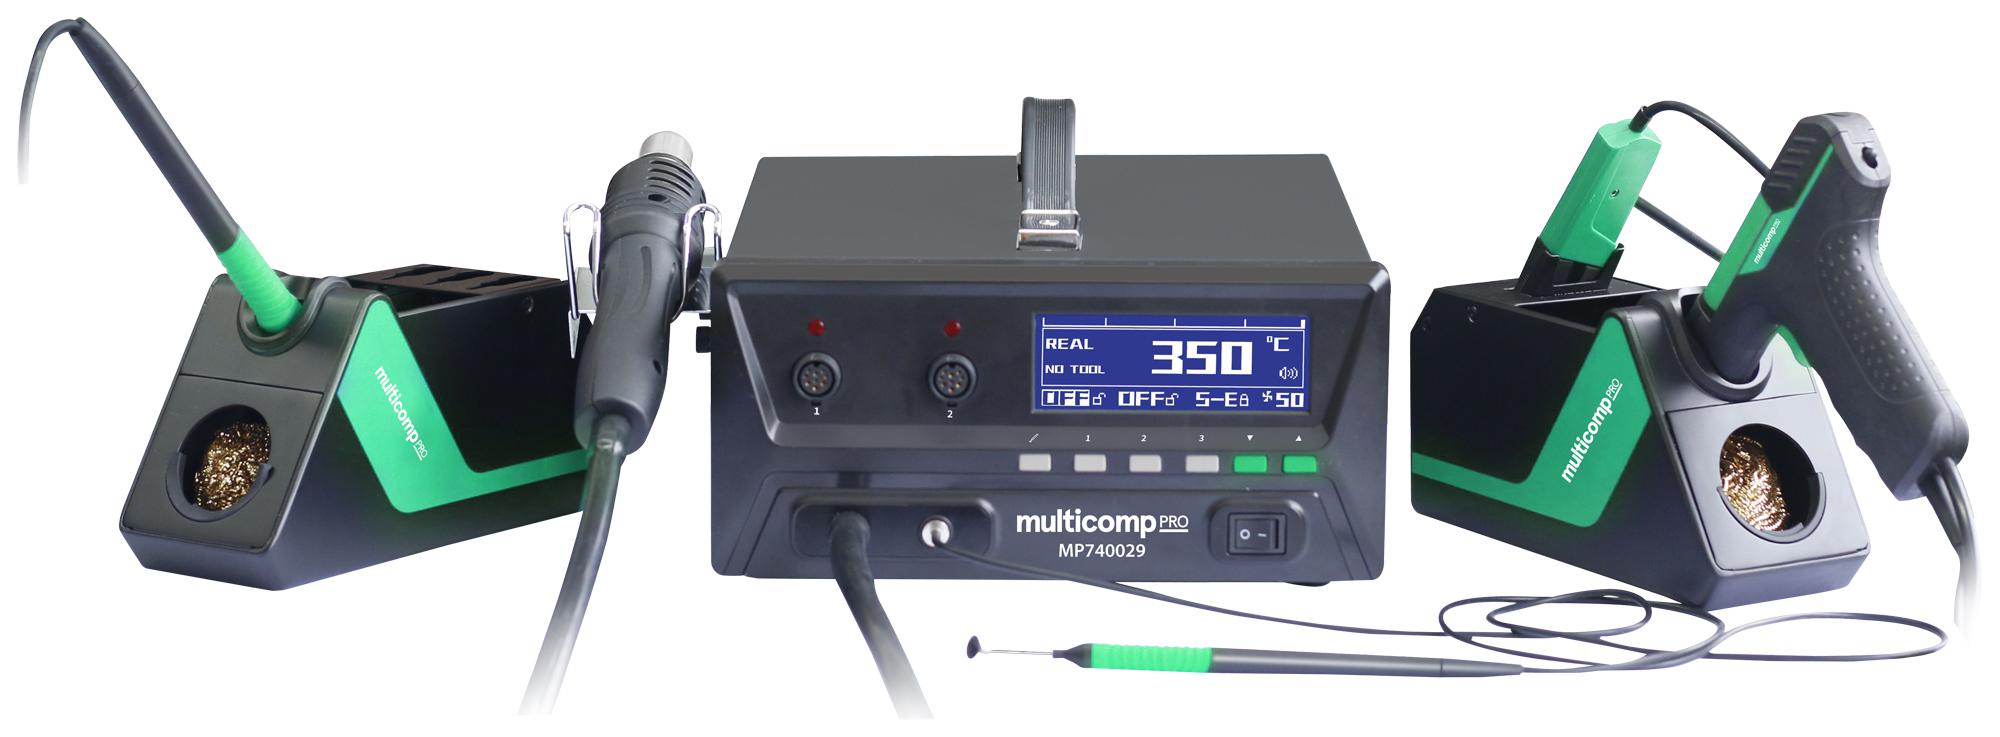 MP740029 SOLDERING REWORK STATION, 4-IN-1, 900W MULTICOMP PRO